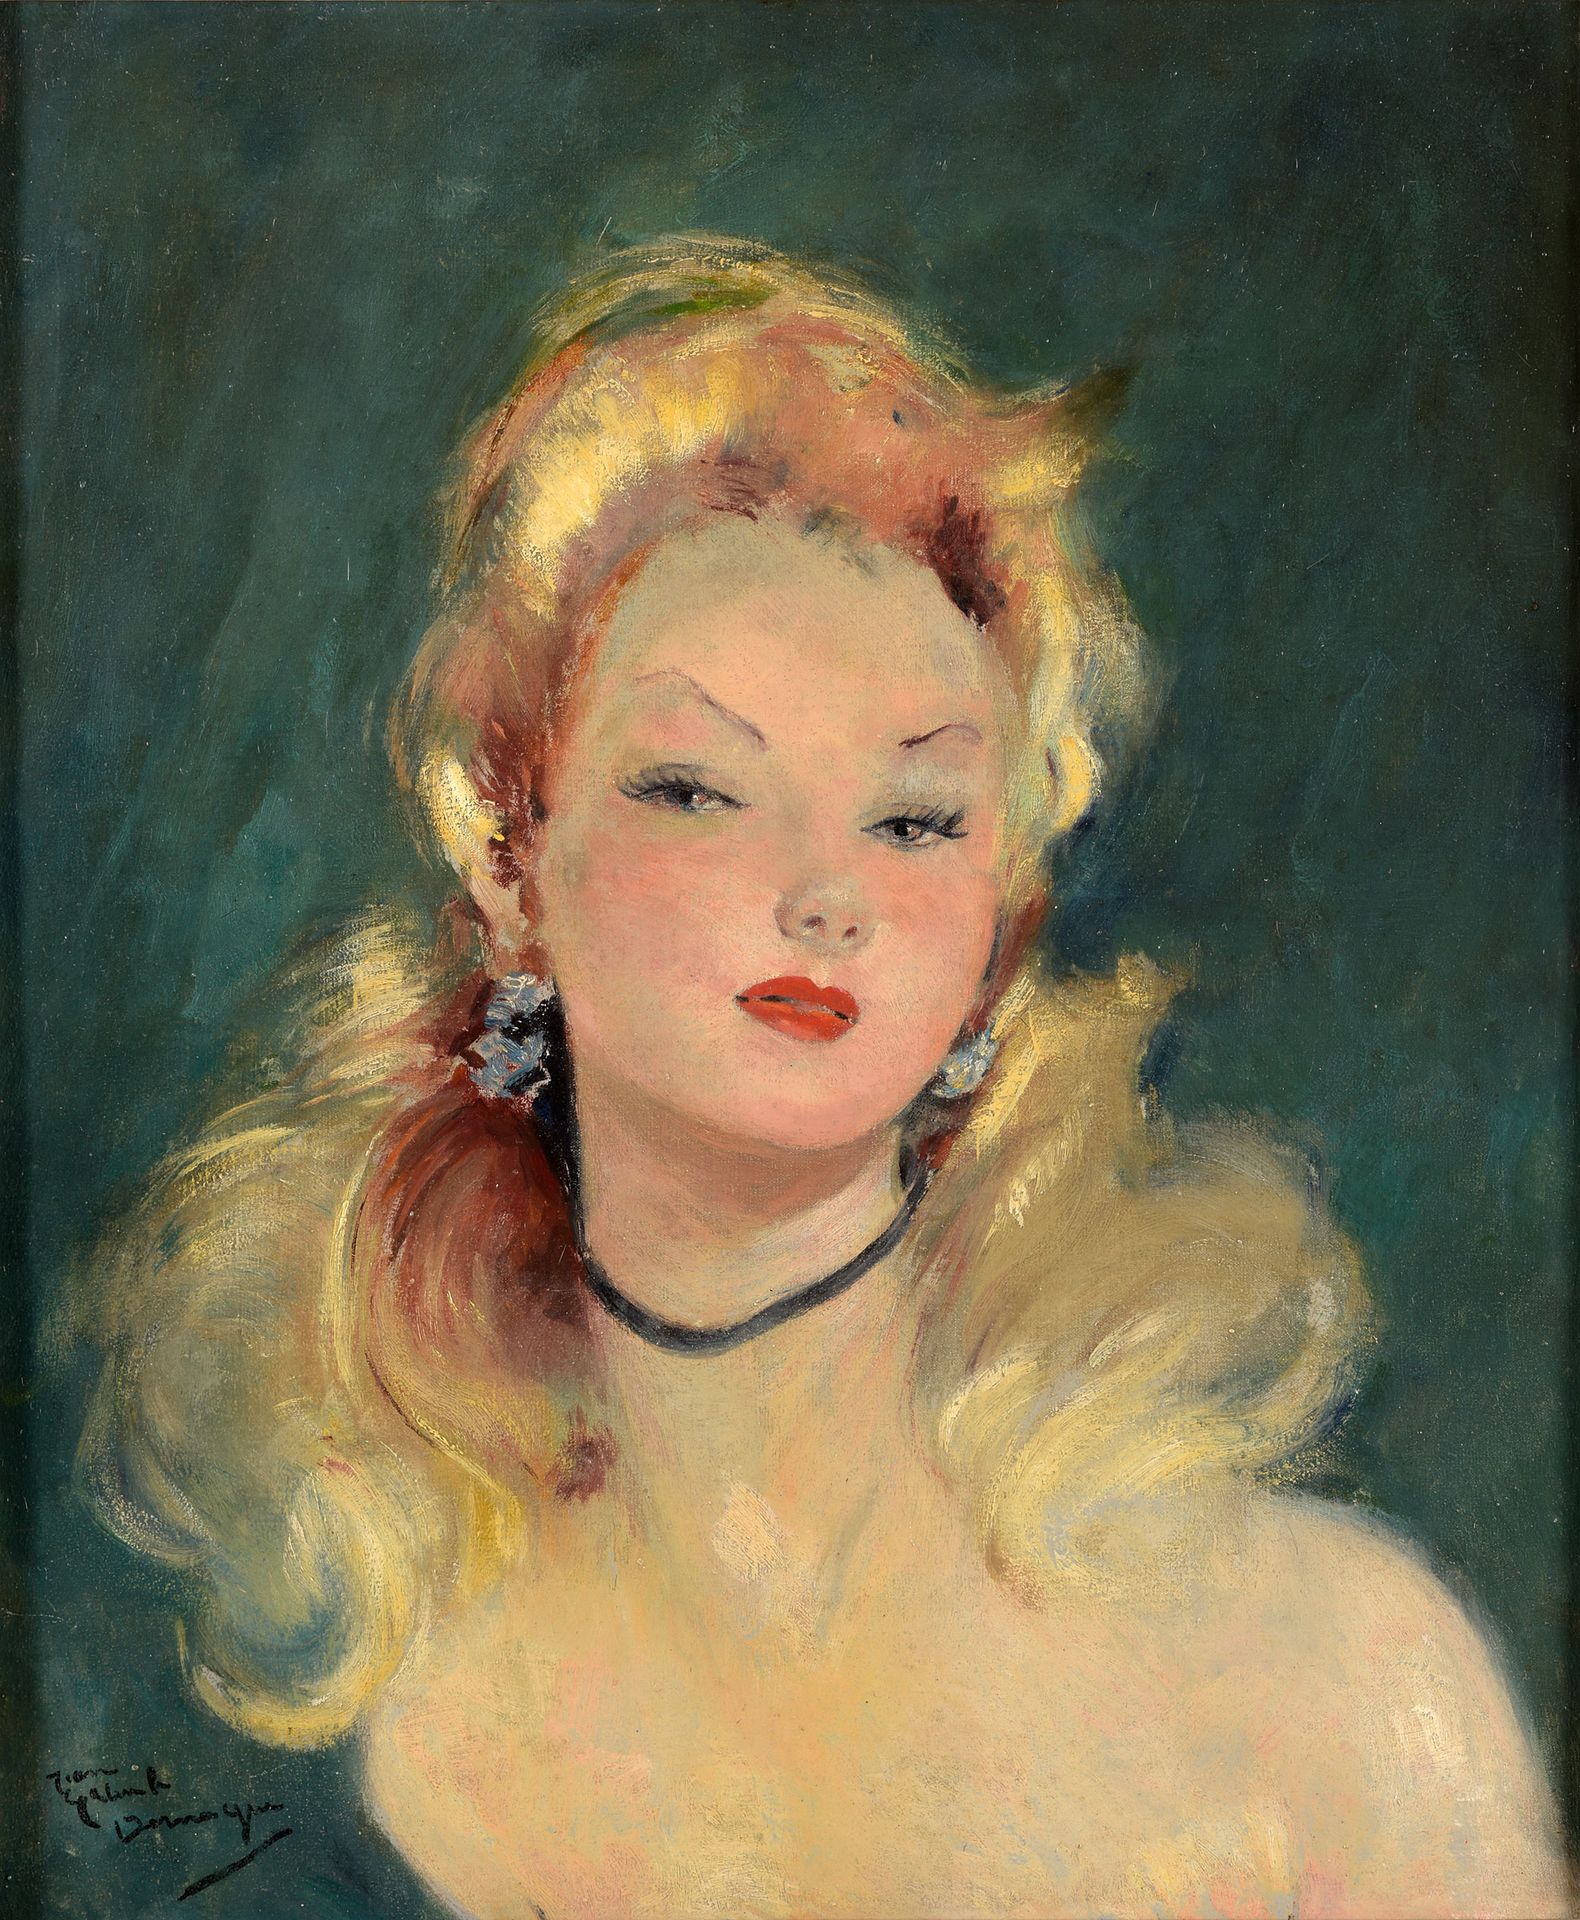 Undeutlich signiert Indistinctly signed mid-20th c.
Portrait of a blonde lady.
O&hellip;